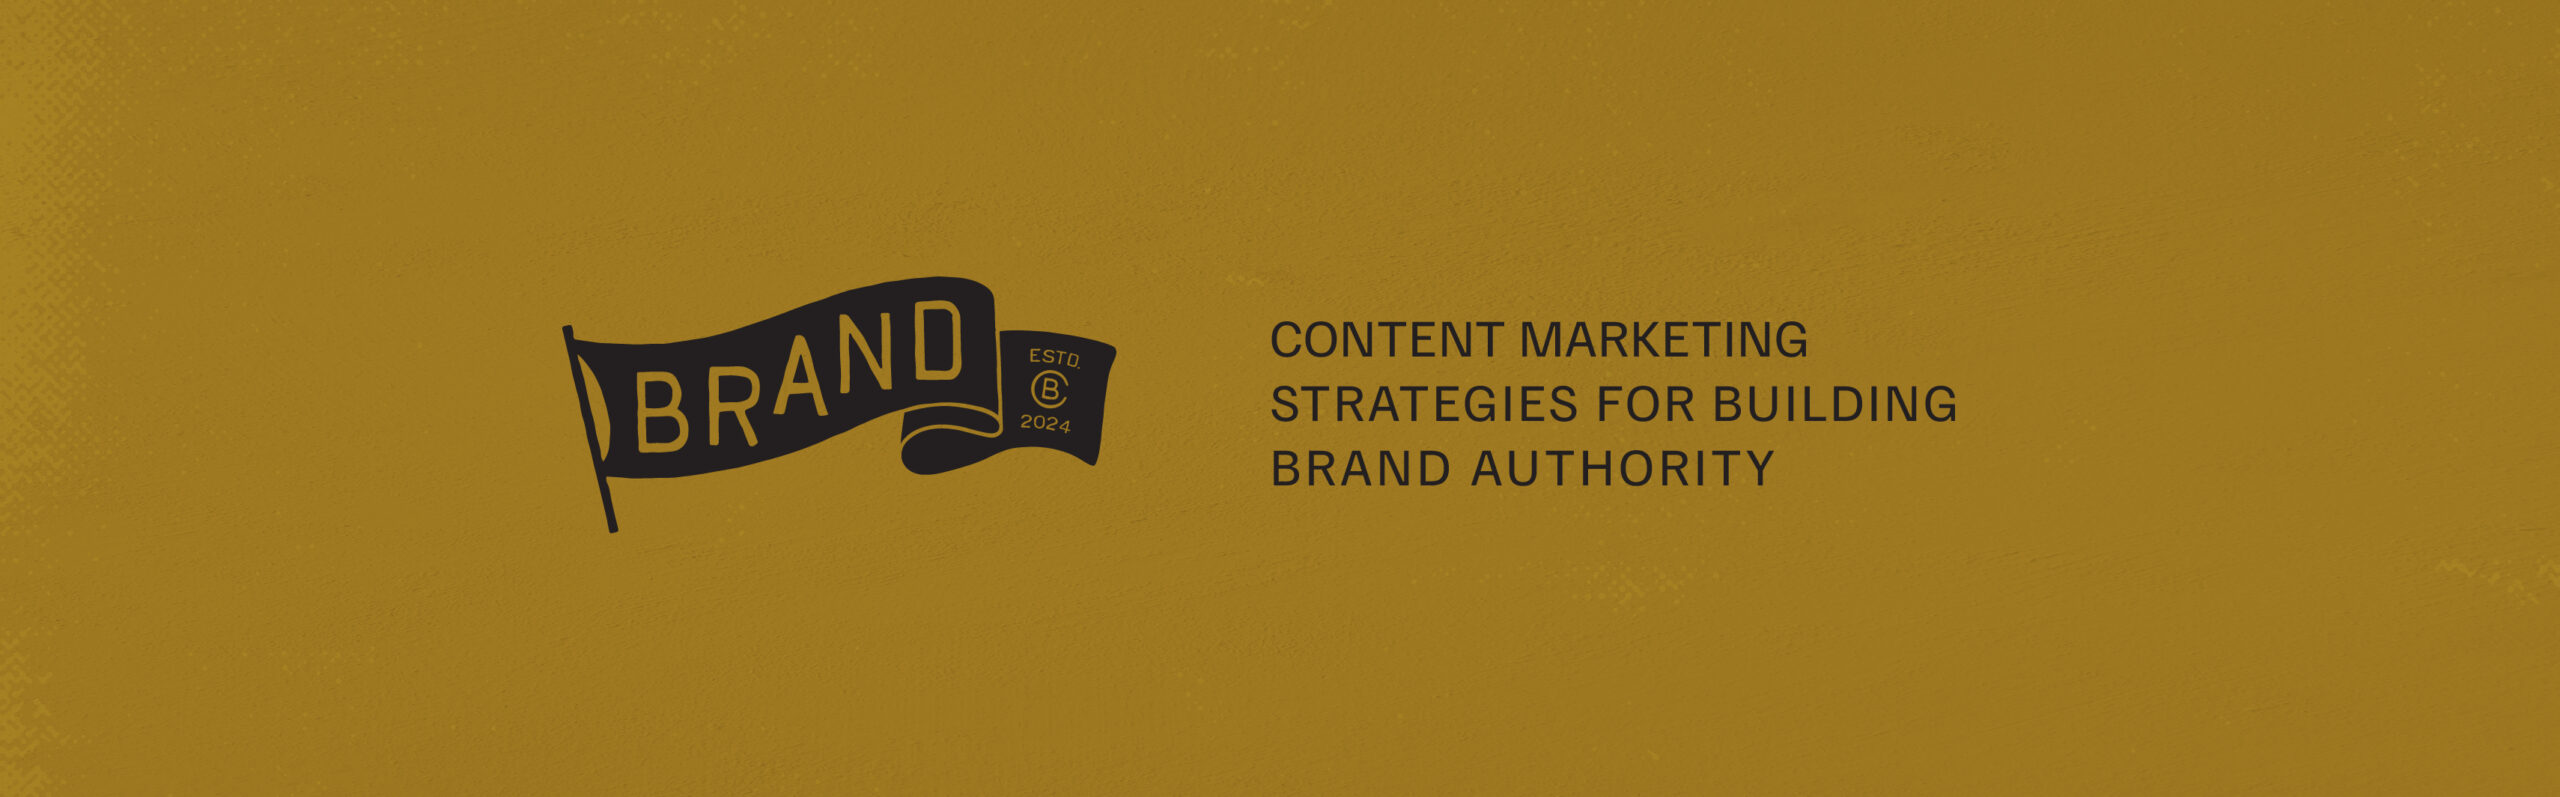 Content Marketing Strategies for Building Brand Authority - Astute Communications